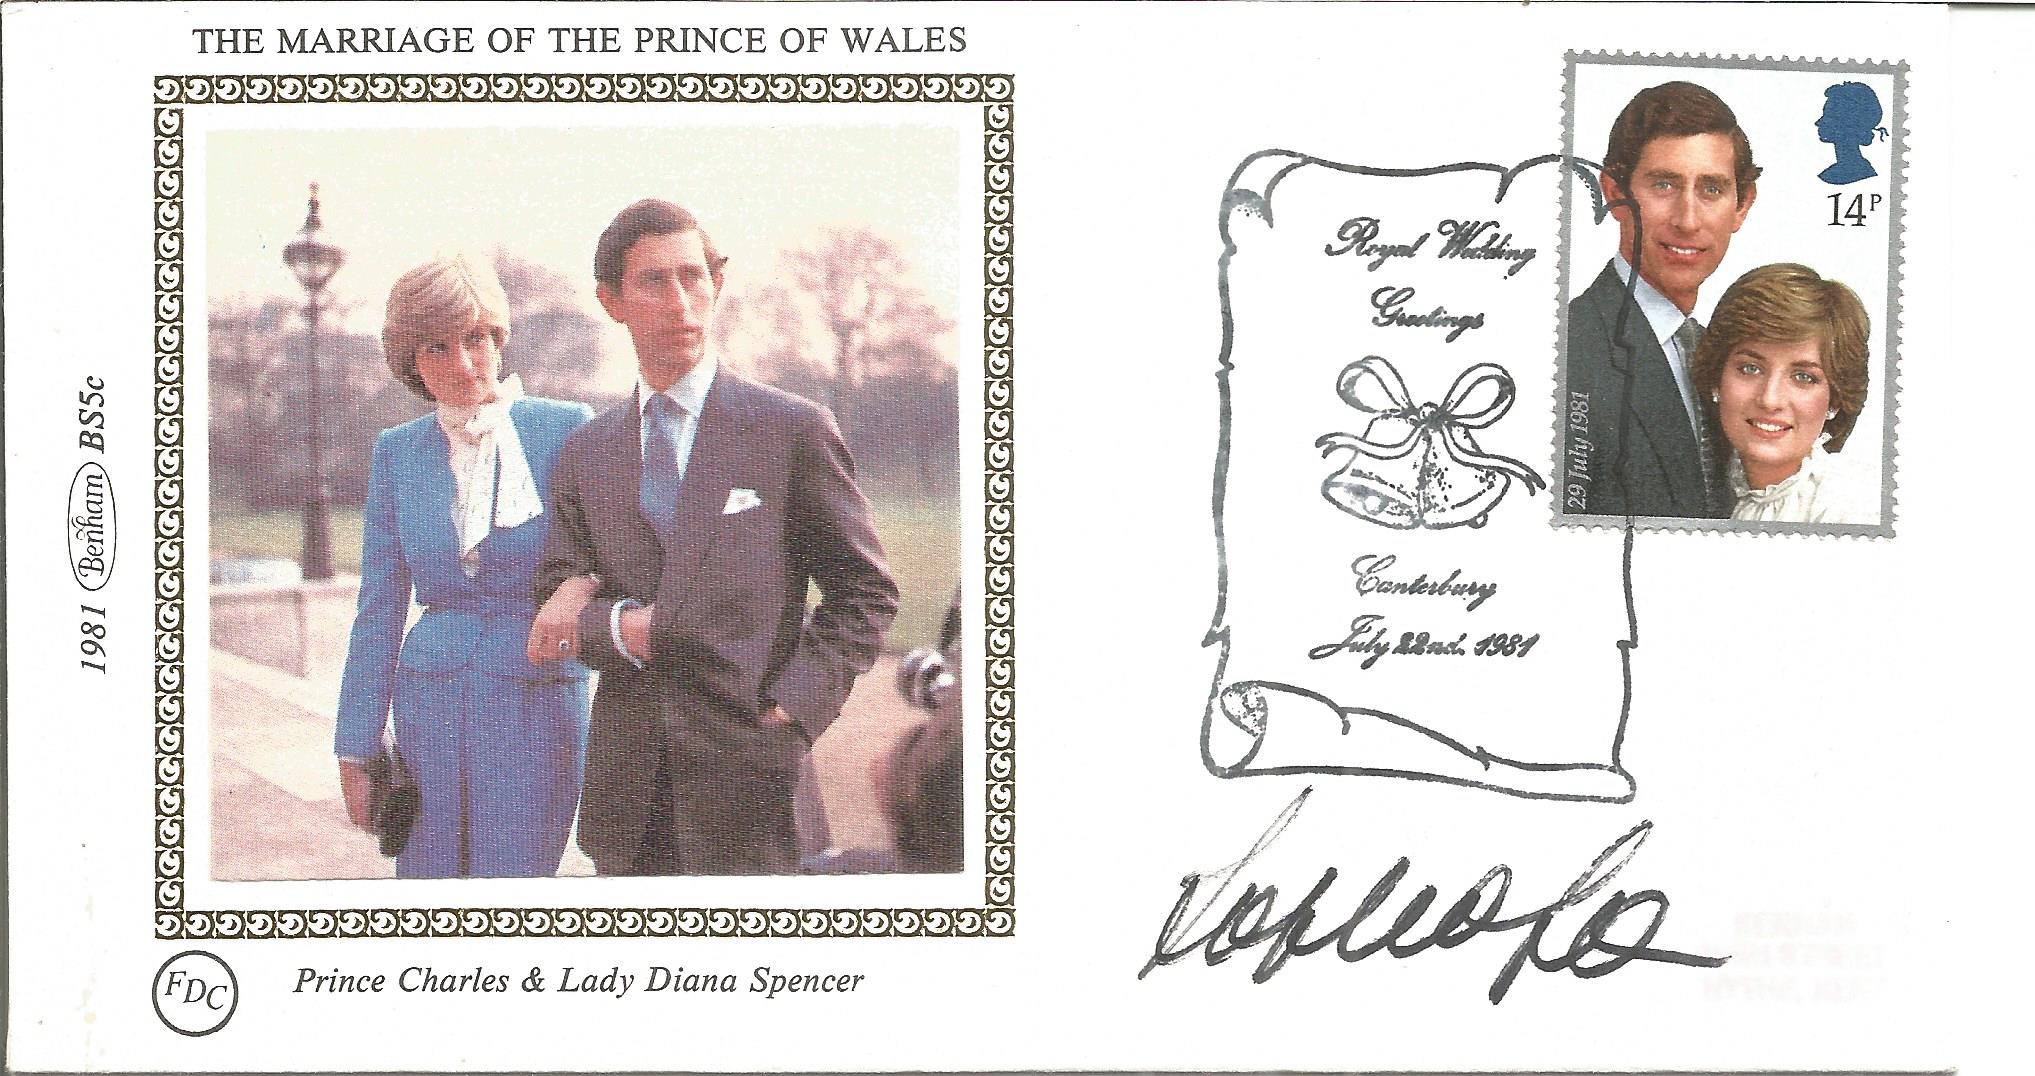 Actress Sophia Loren signed Benham small Silk FDC celebrating the marriage of the Prince of Wales.